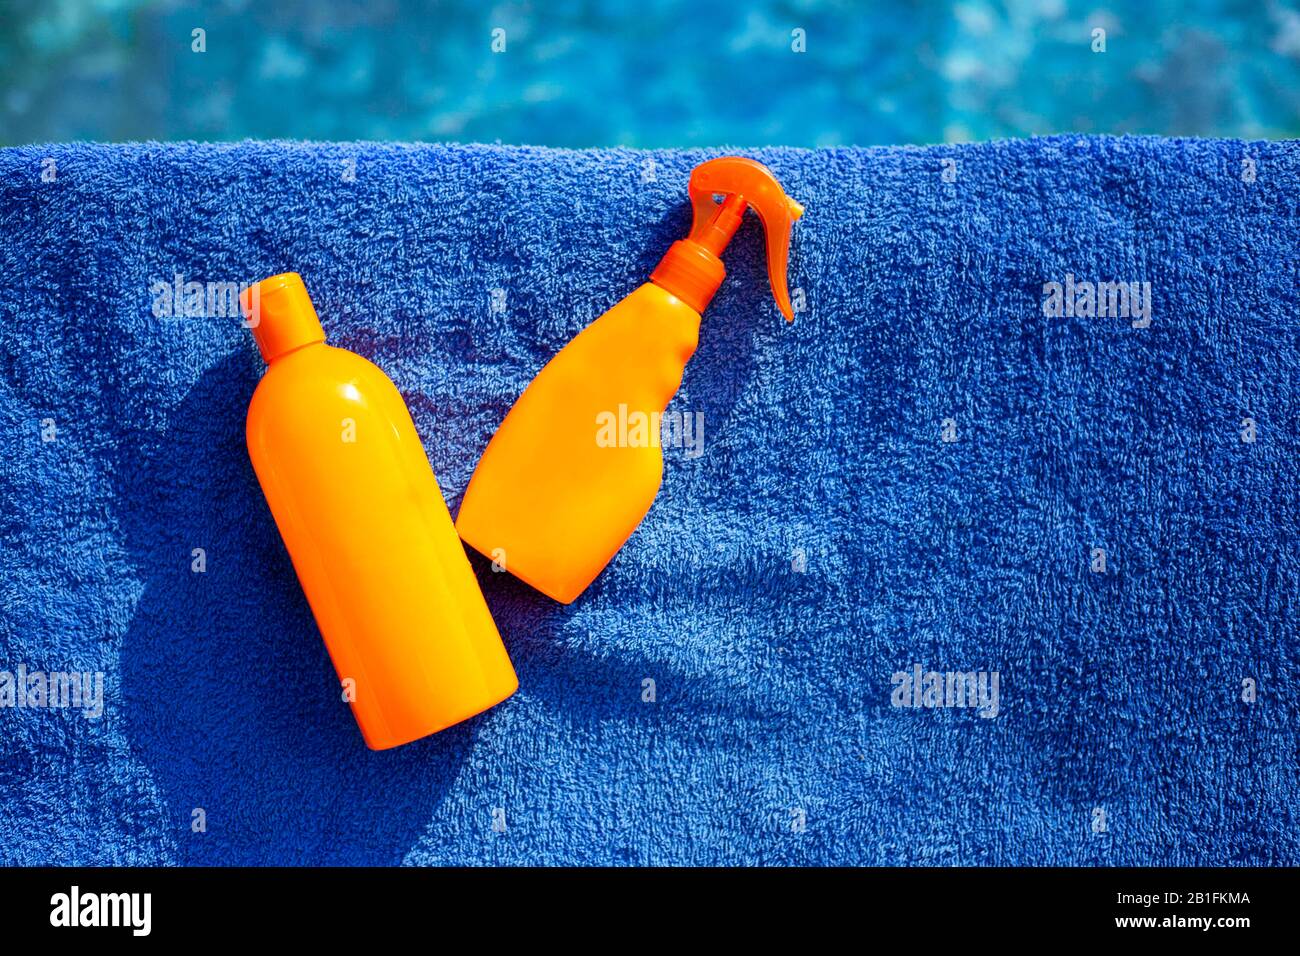 Cosmetic sunscreen products, set different orange bottles of sun protection body cream on blue towel against swimming pool. Skin care and protection Stock Photo